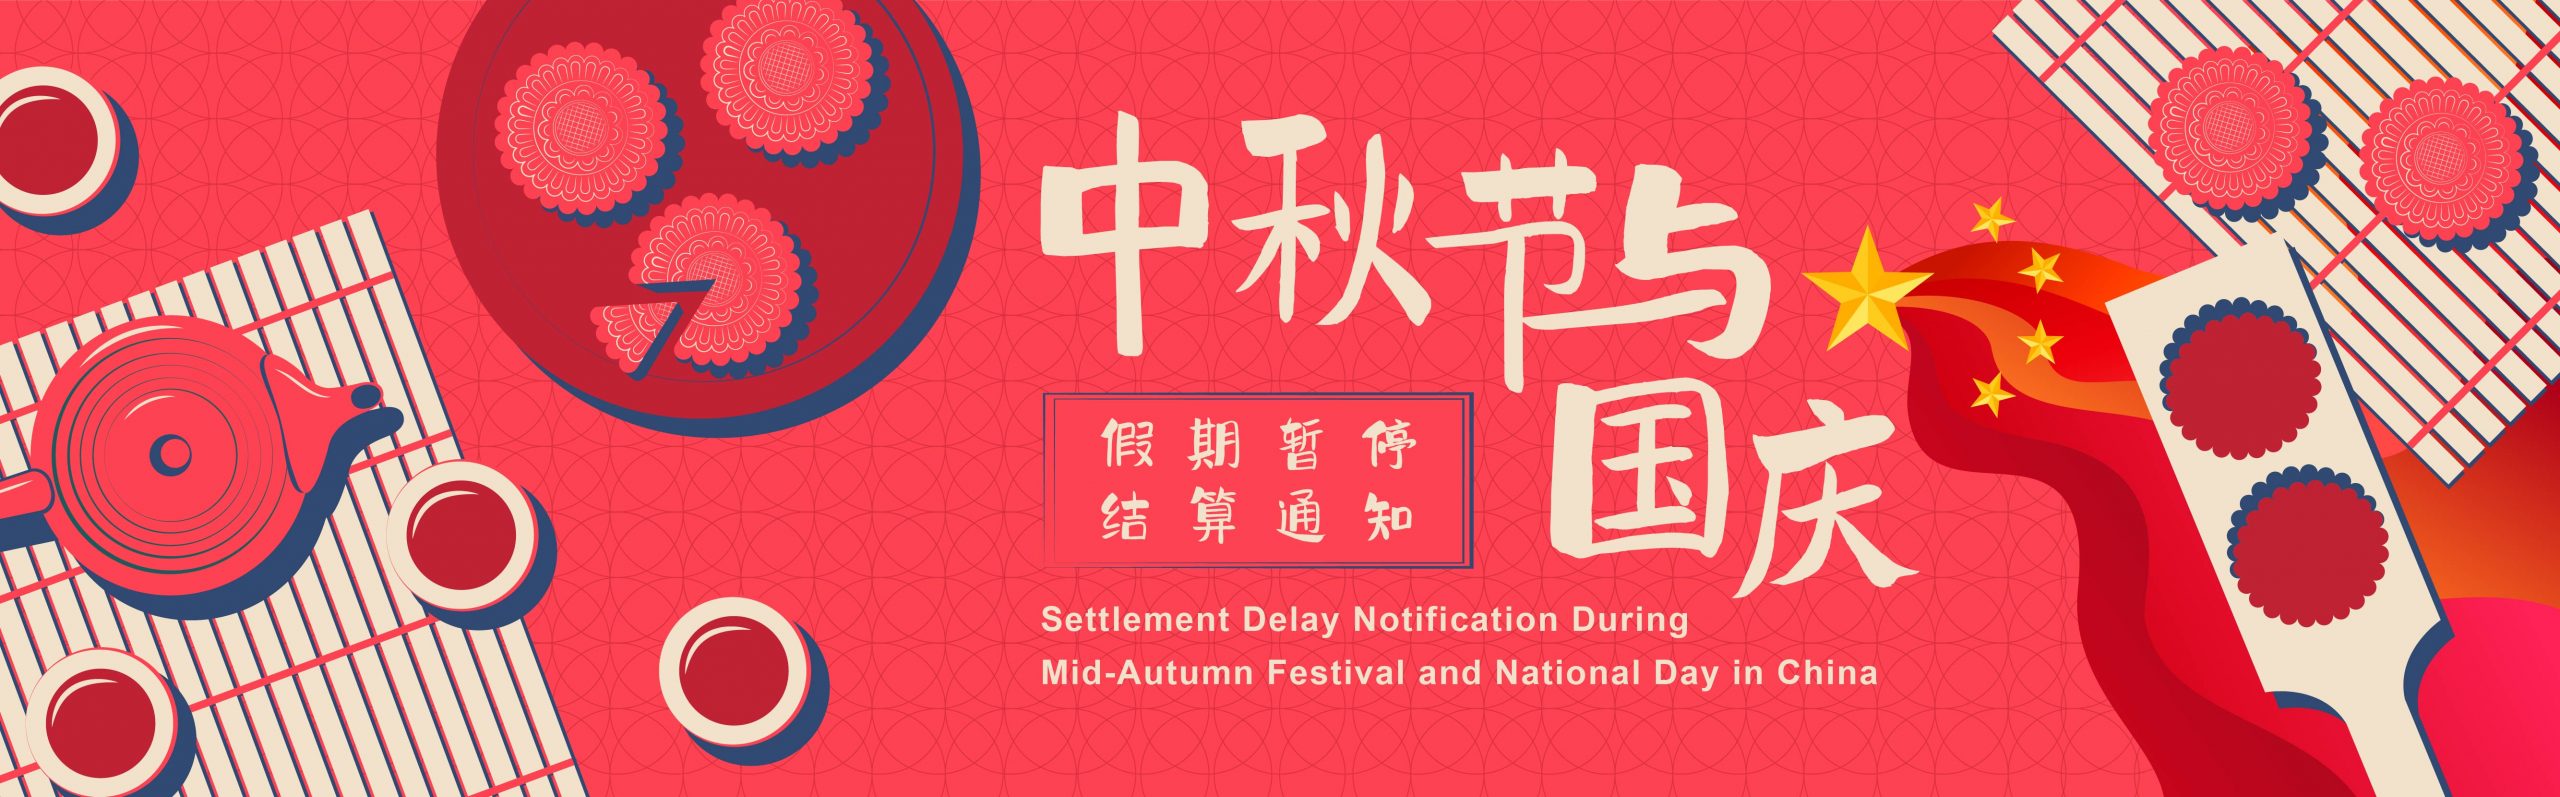 Settlement Delay Notification during Mid-Autumn Festival and National Day in China 关于2021年中国中秋节和国庆节假期暂停结算的通知